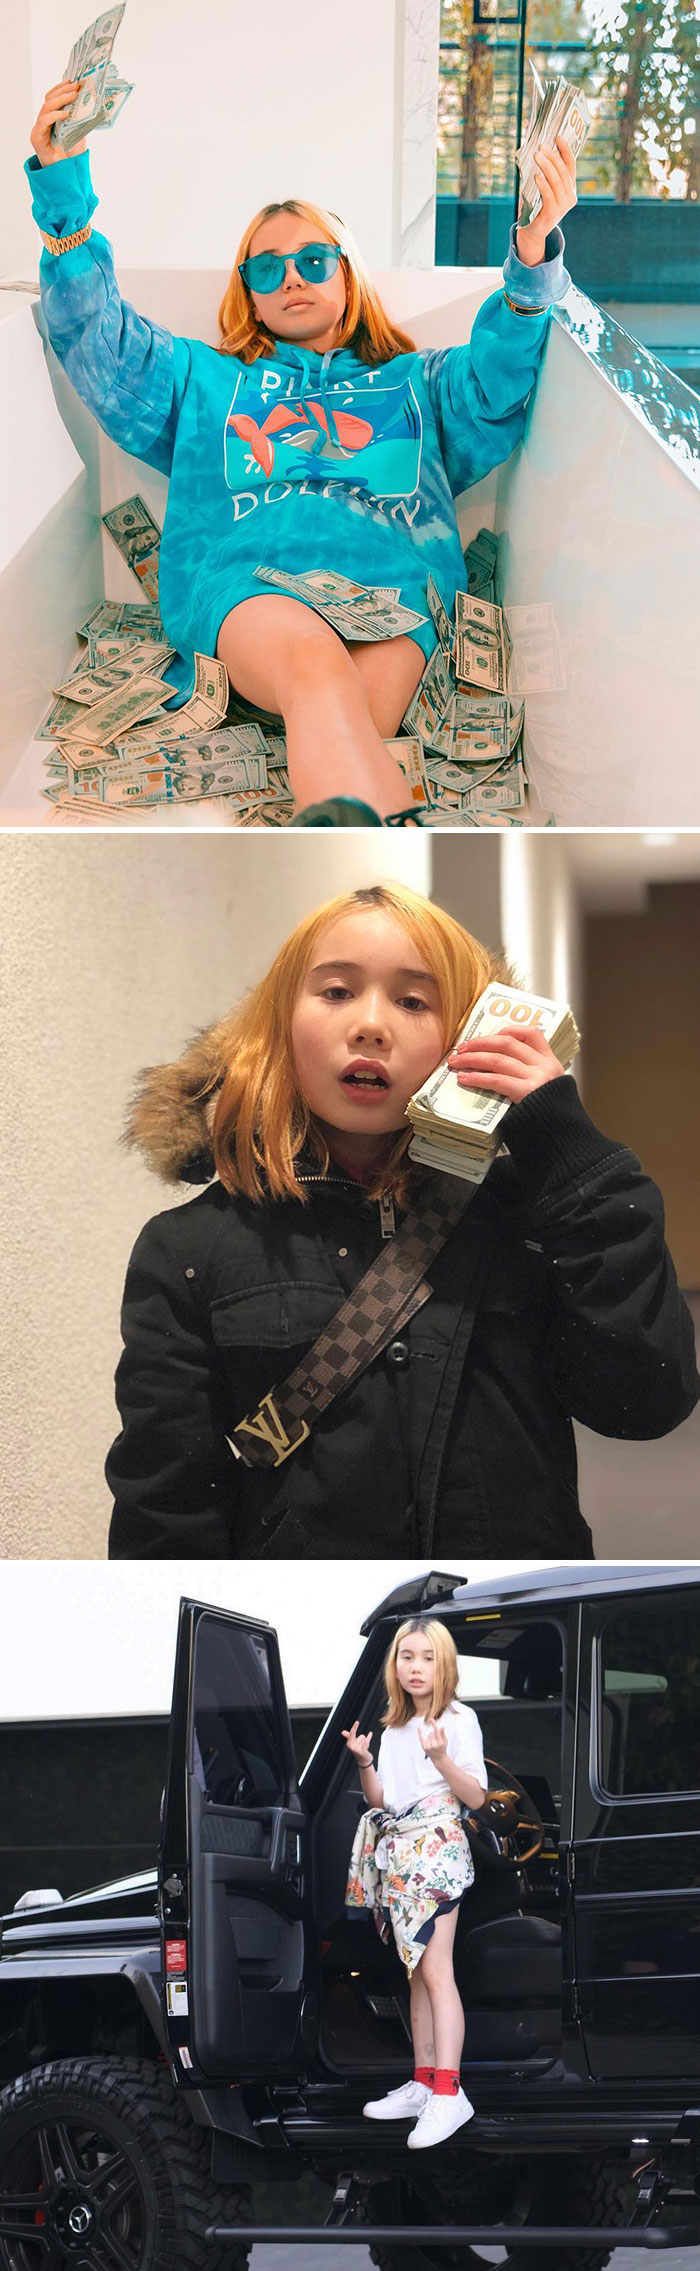 15-Year-Old Rapper Lil Tay Showing Off Her Wealth On Social Media